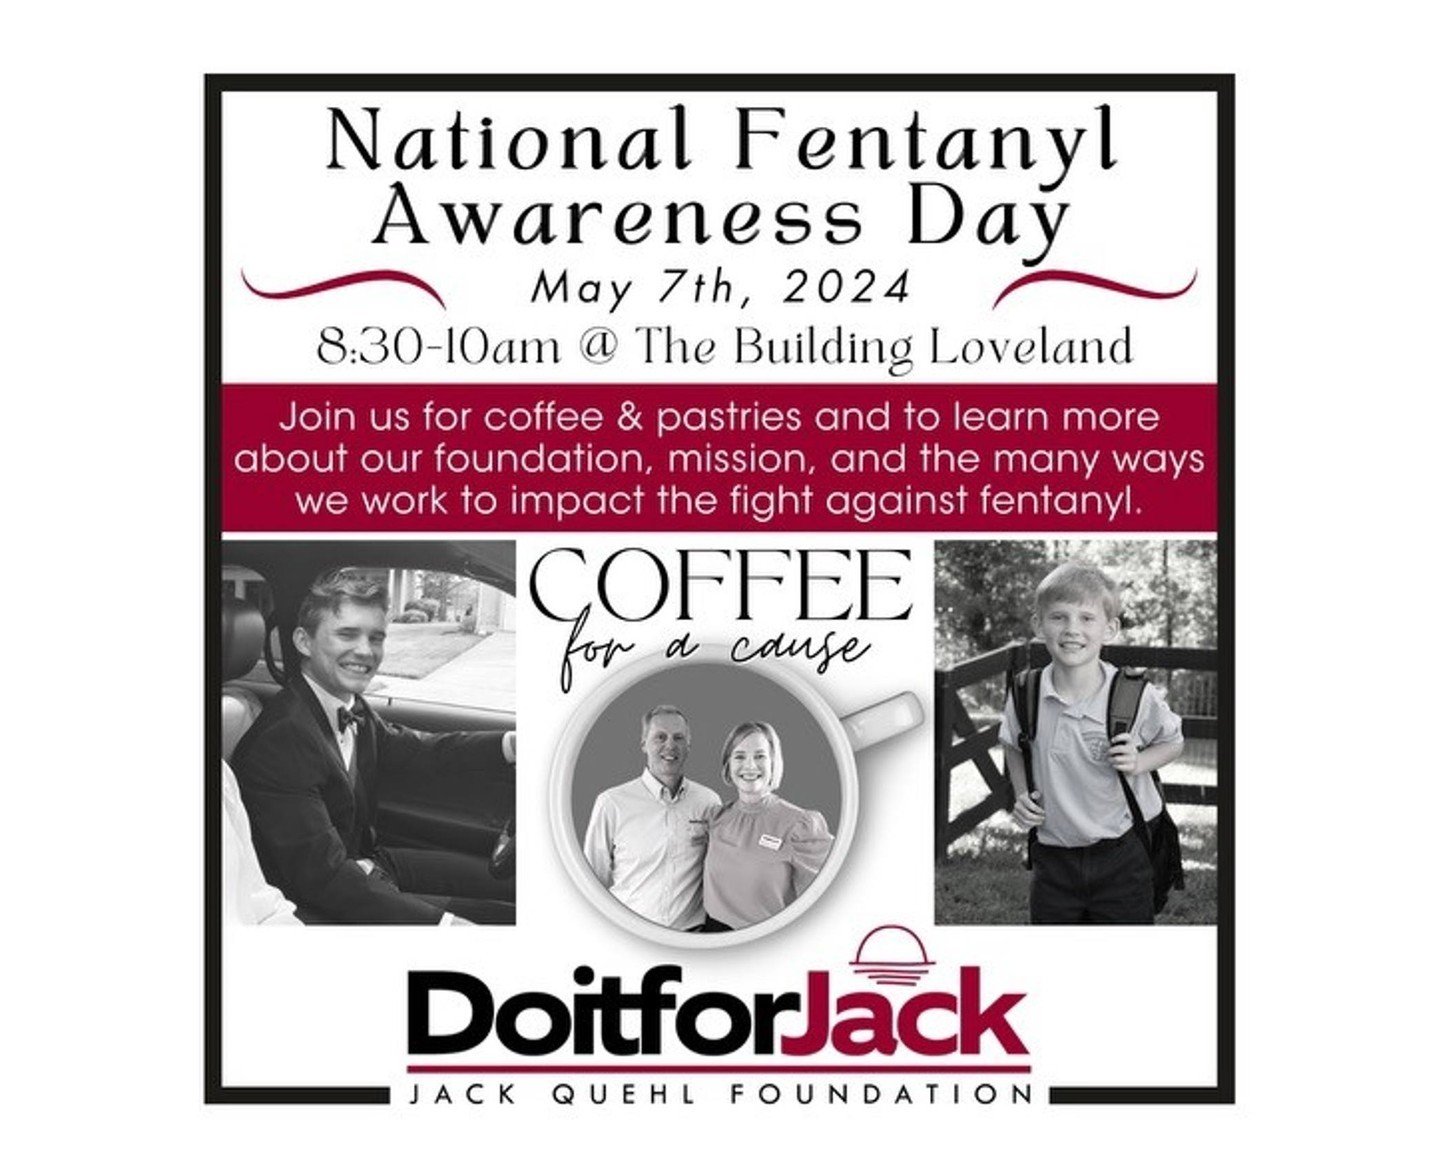 Calling all Loveland businesses! Please join @doitforjackquehl and the Jack Quehl Foundation on National Fentanyl Awareness Day, Tuesday, May 7 from 8:30am-10a at The Building in Loveland for coffee and pastries to learn more about the foundation and